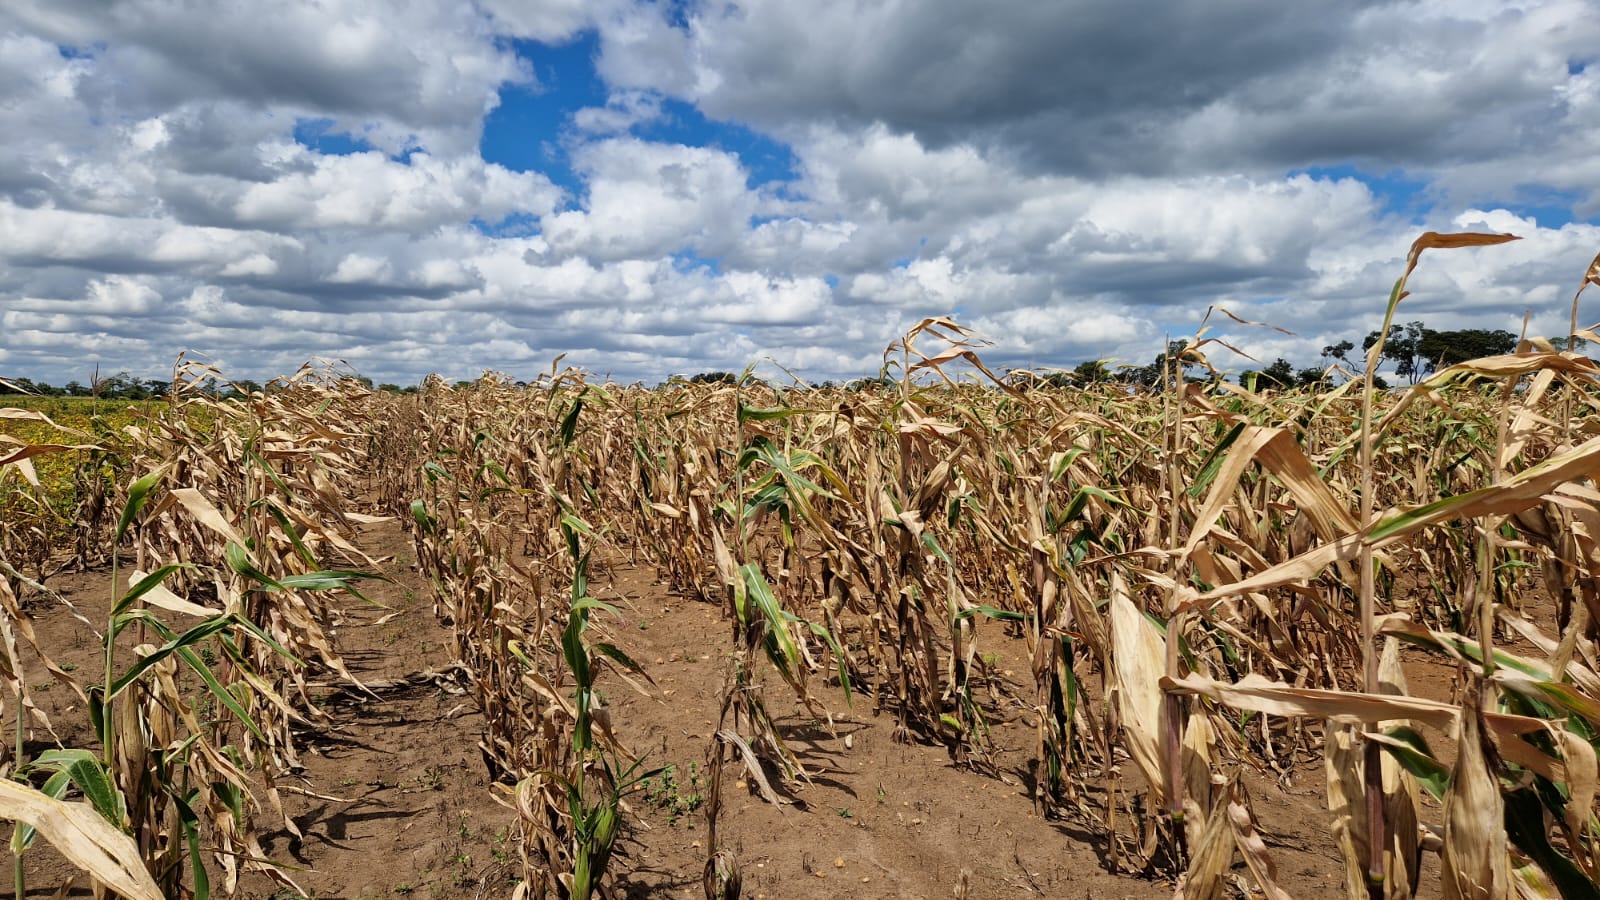 Maize devastated by drought